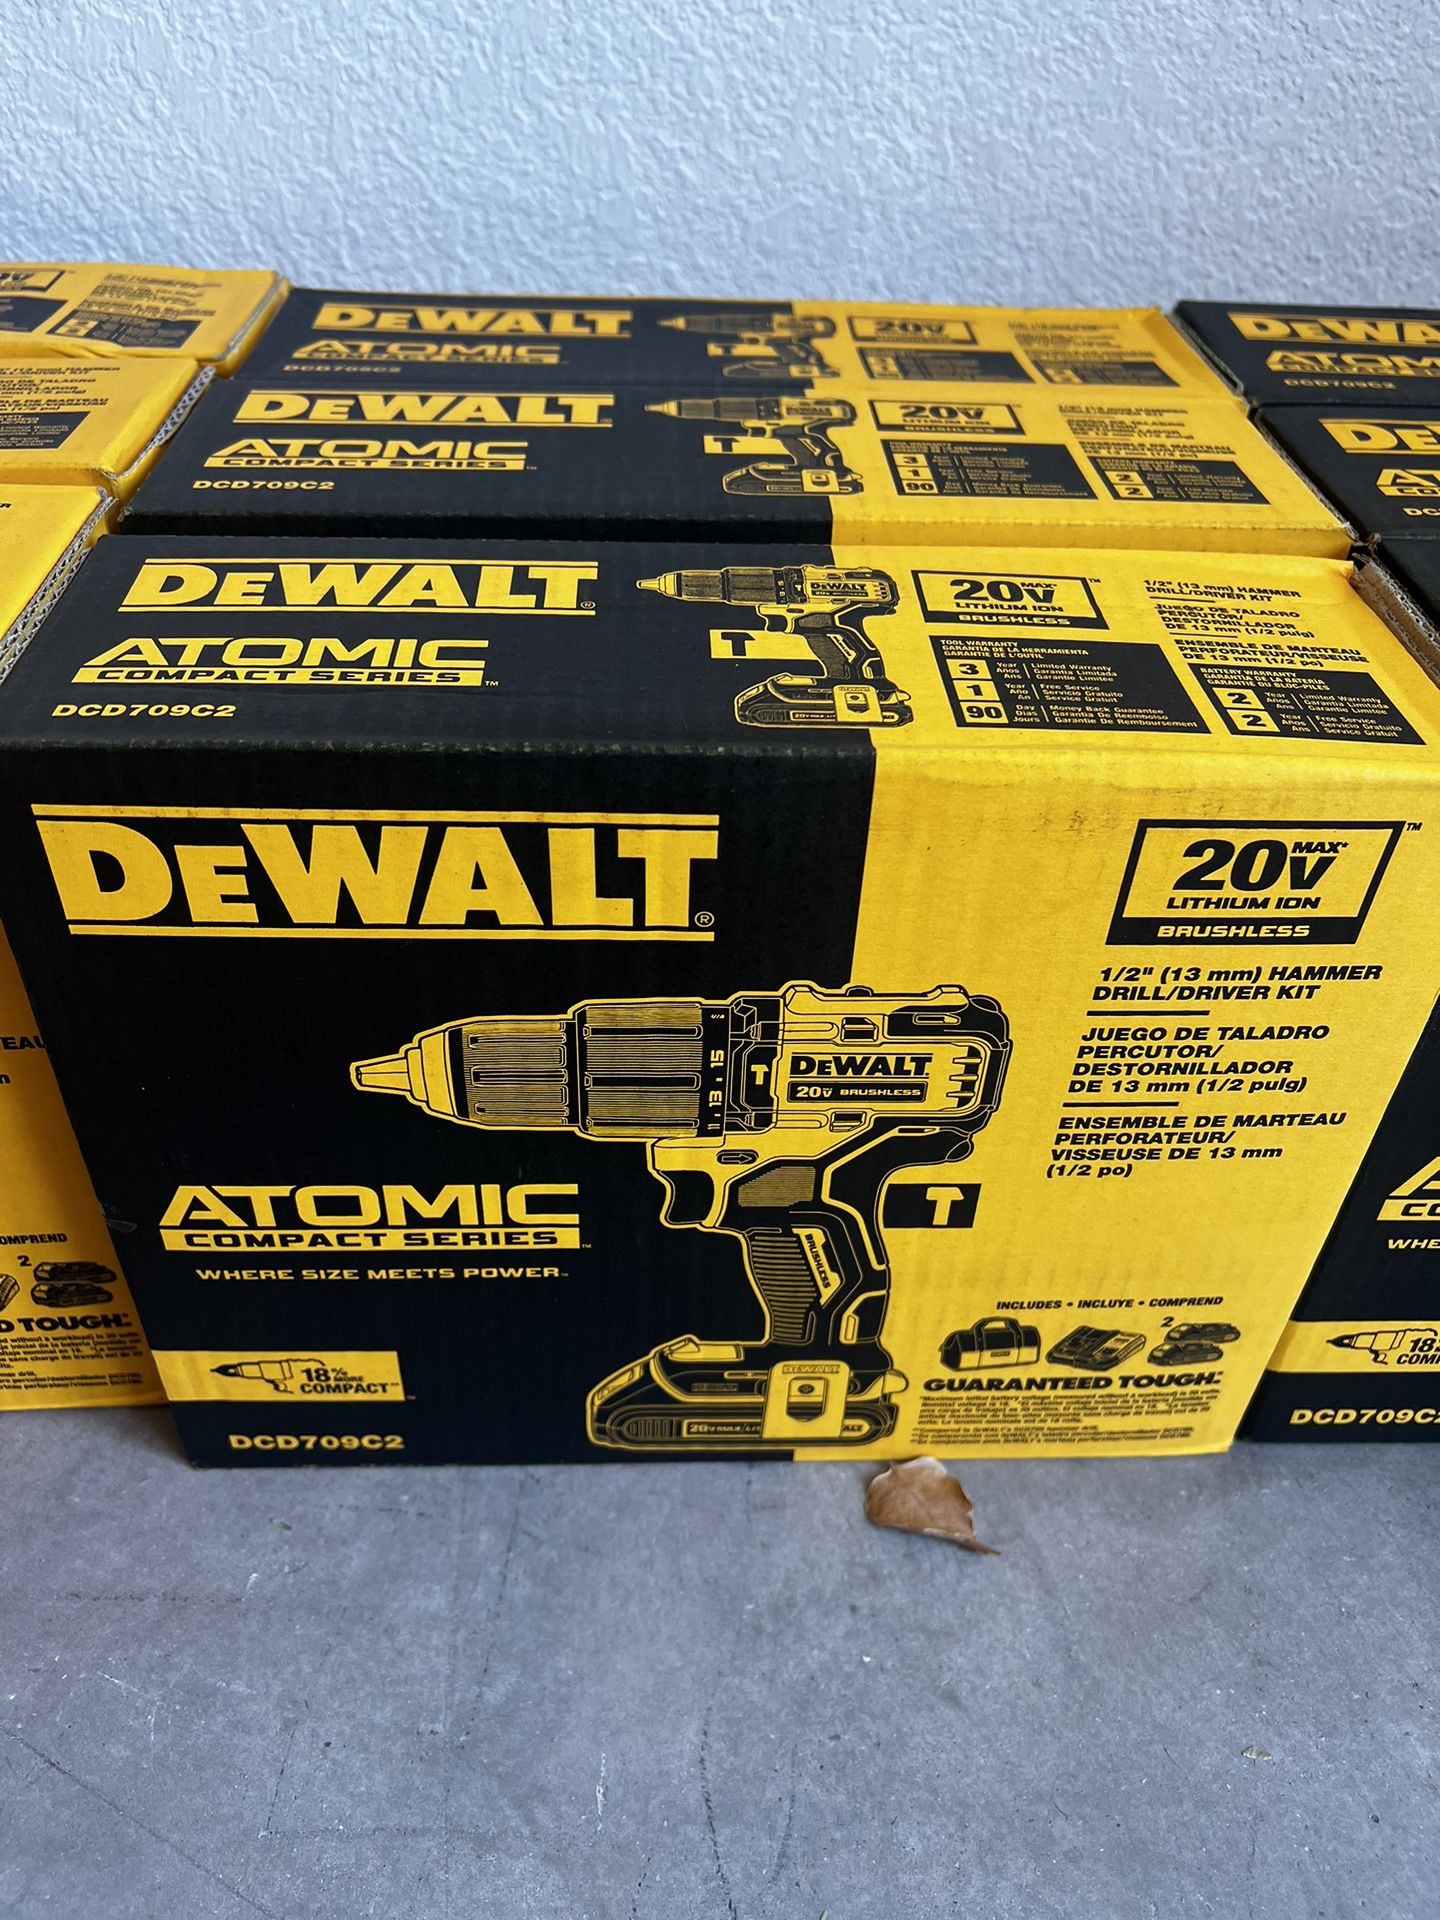 DEWALT ATOMIC 20V MAX Cordless Brushless Compact 1/2 in. Hammer Drill, (2) 20V 1.3Ah Batteries, Charger, and Bag